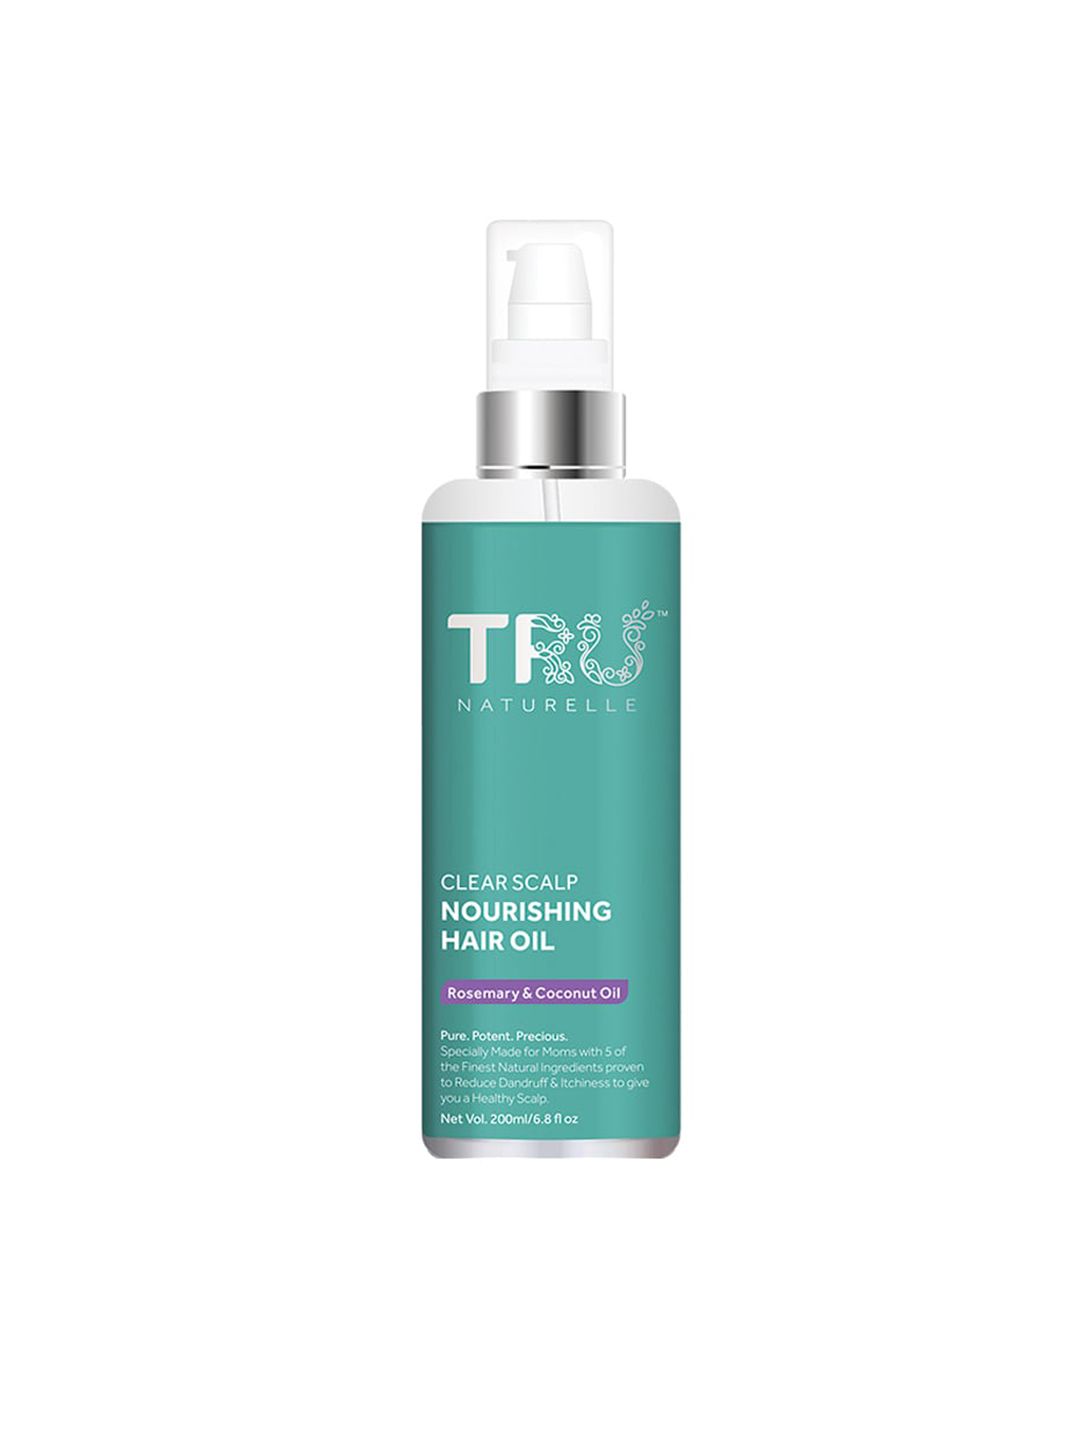 TRU NATURELLE Clear Scalp Anti-Dandruff Hair Oil with Rosemary & Coconut Oil - 200ml Price in India